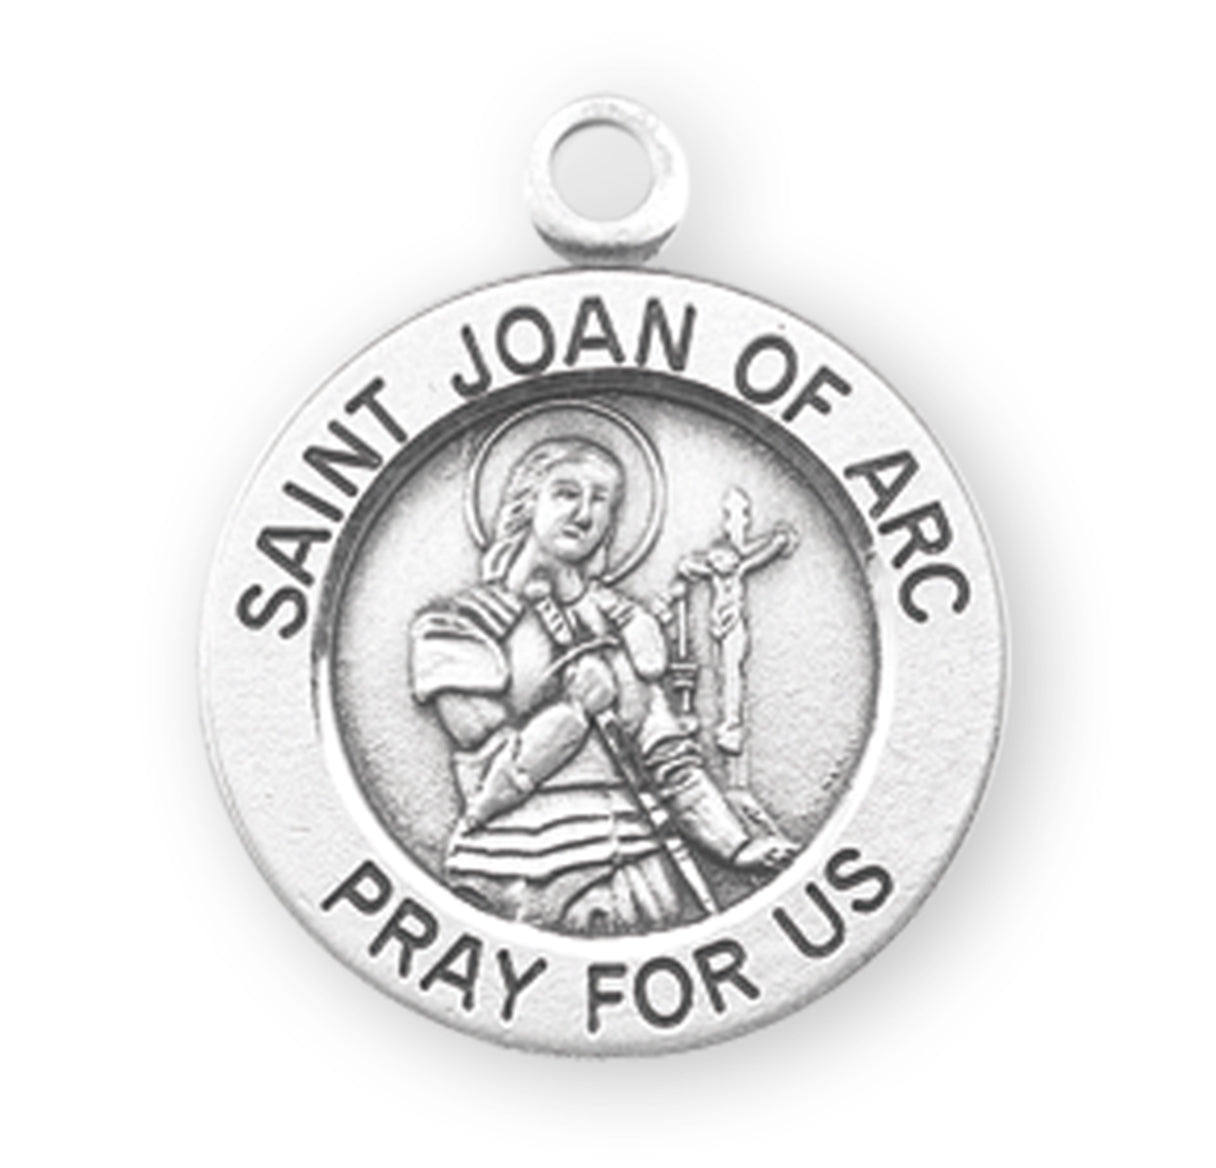 Patron Saint Joan of Arc Round Sterling Silver Medal